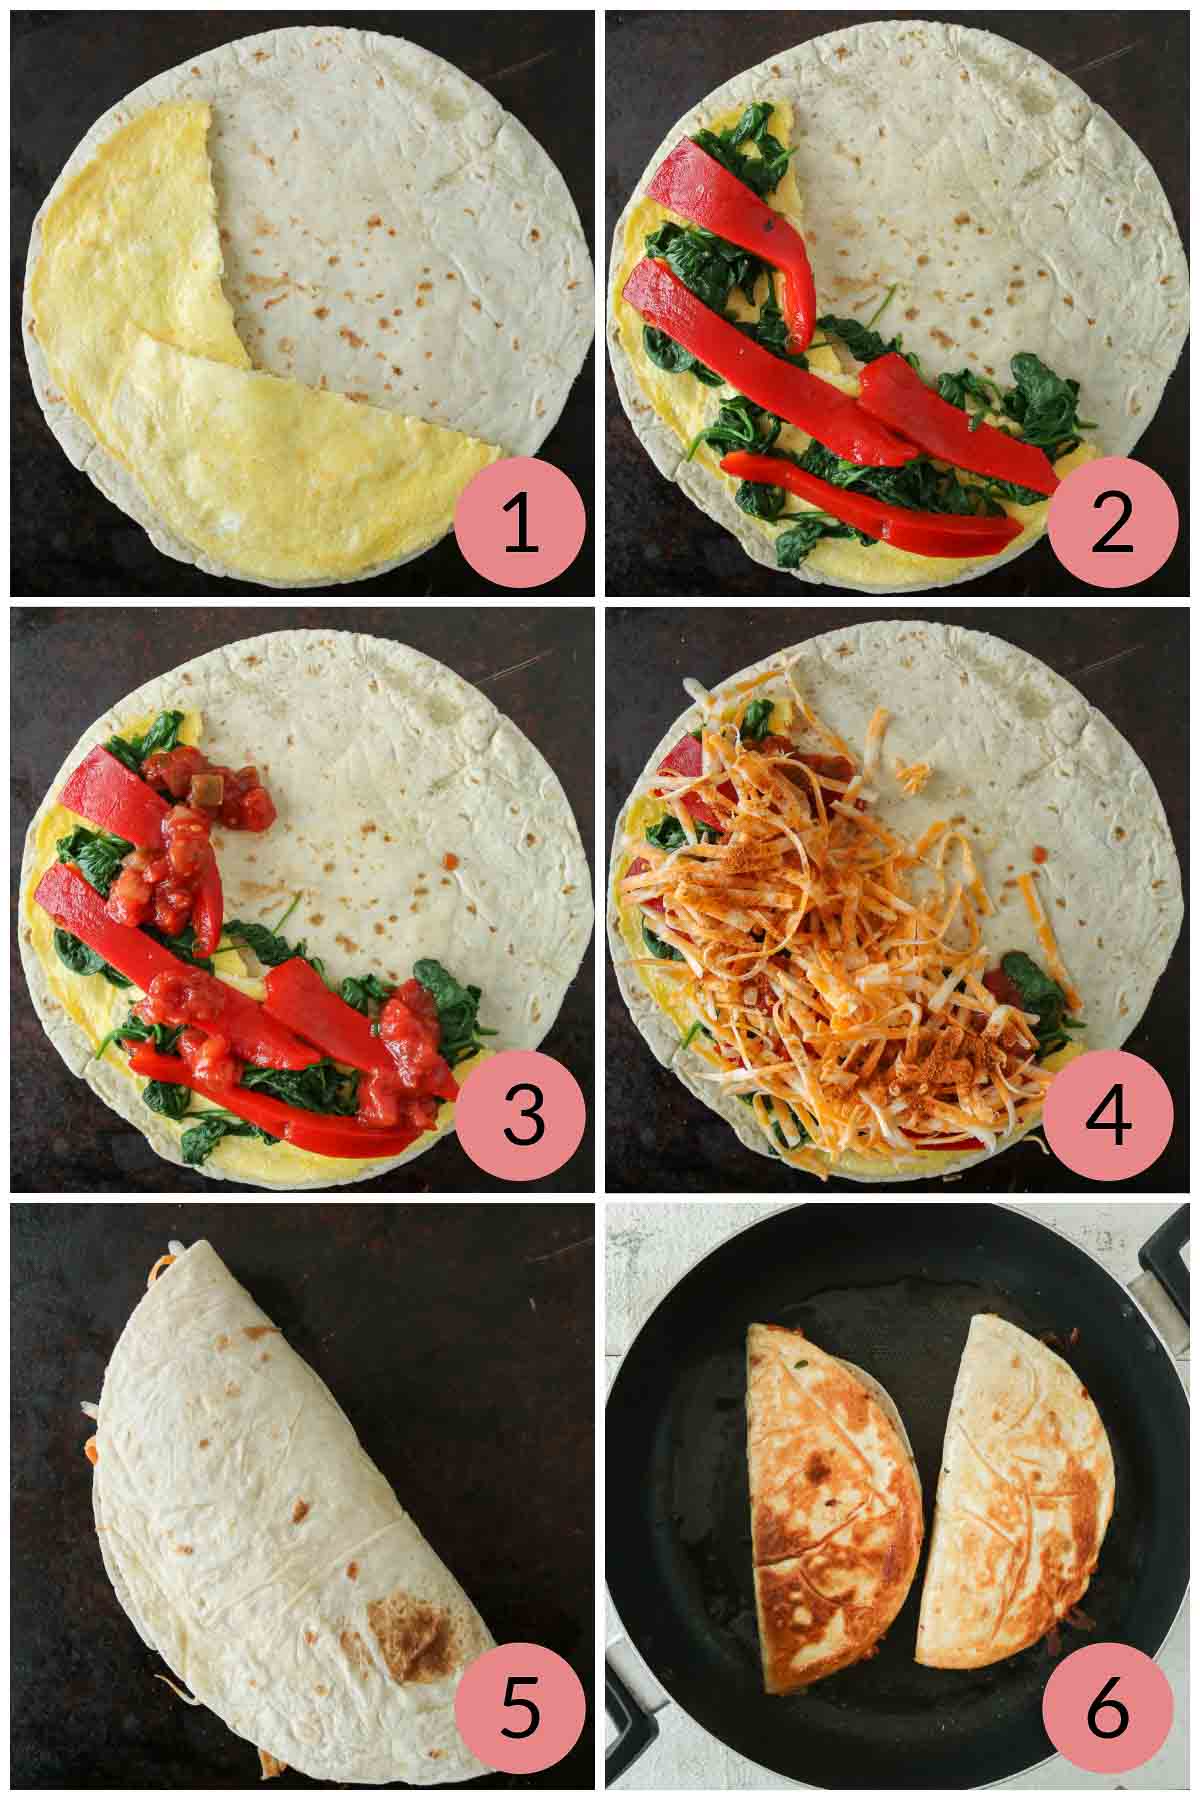 Collage of steps to assemble and pan fry breakfast quesadillas.